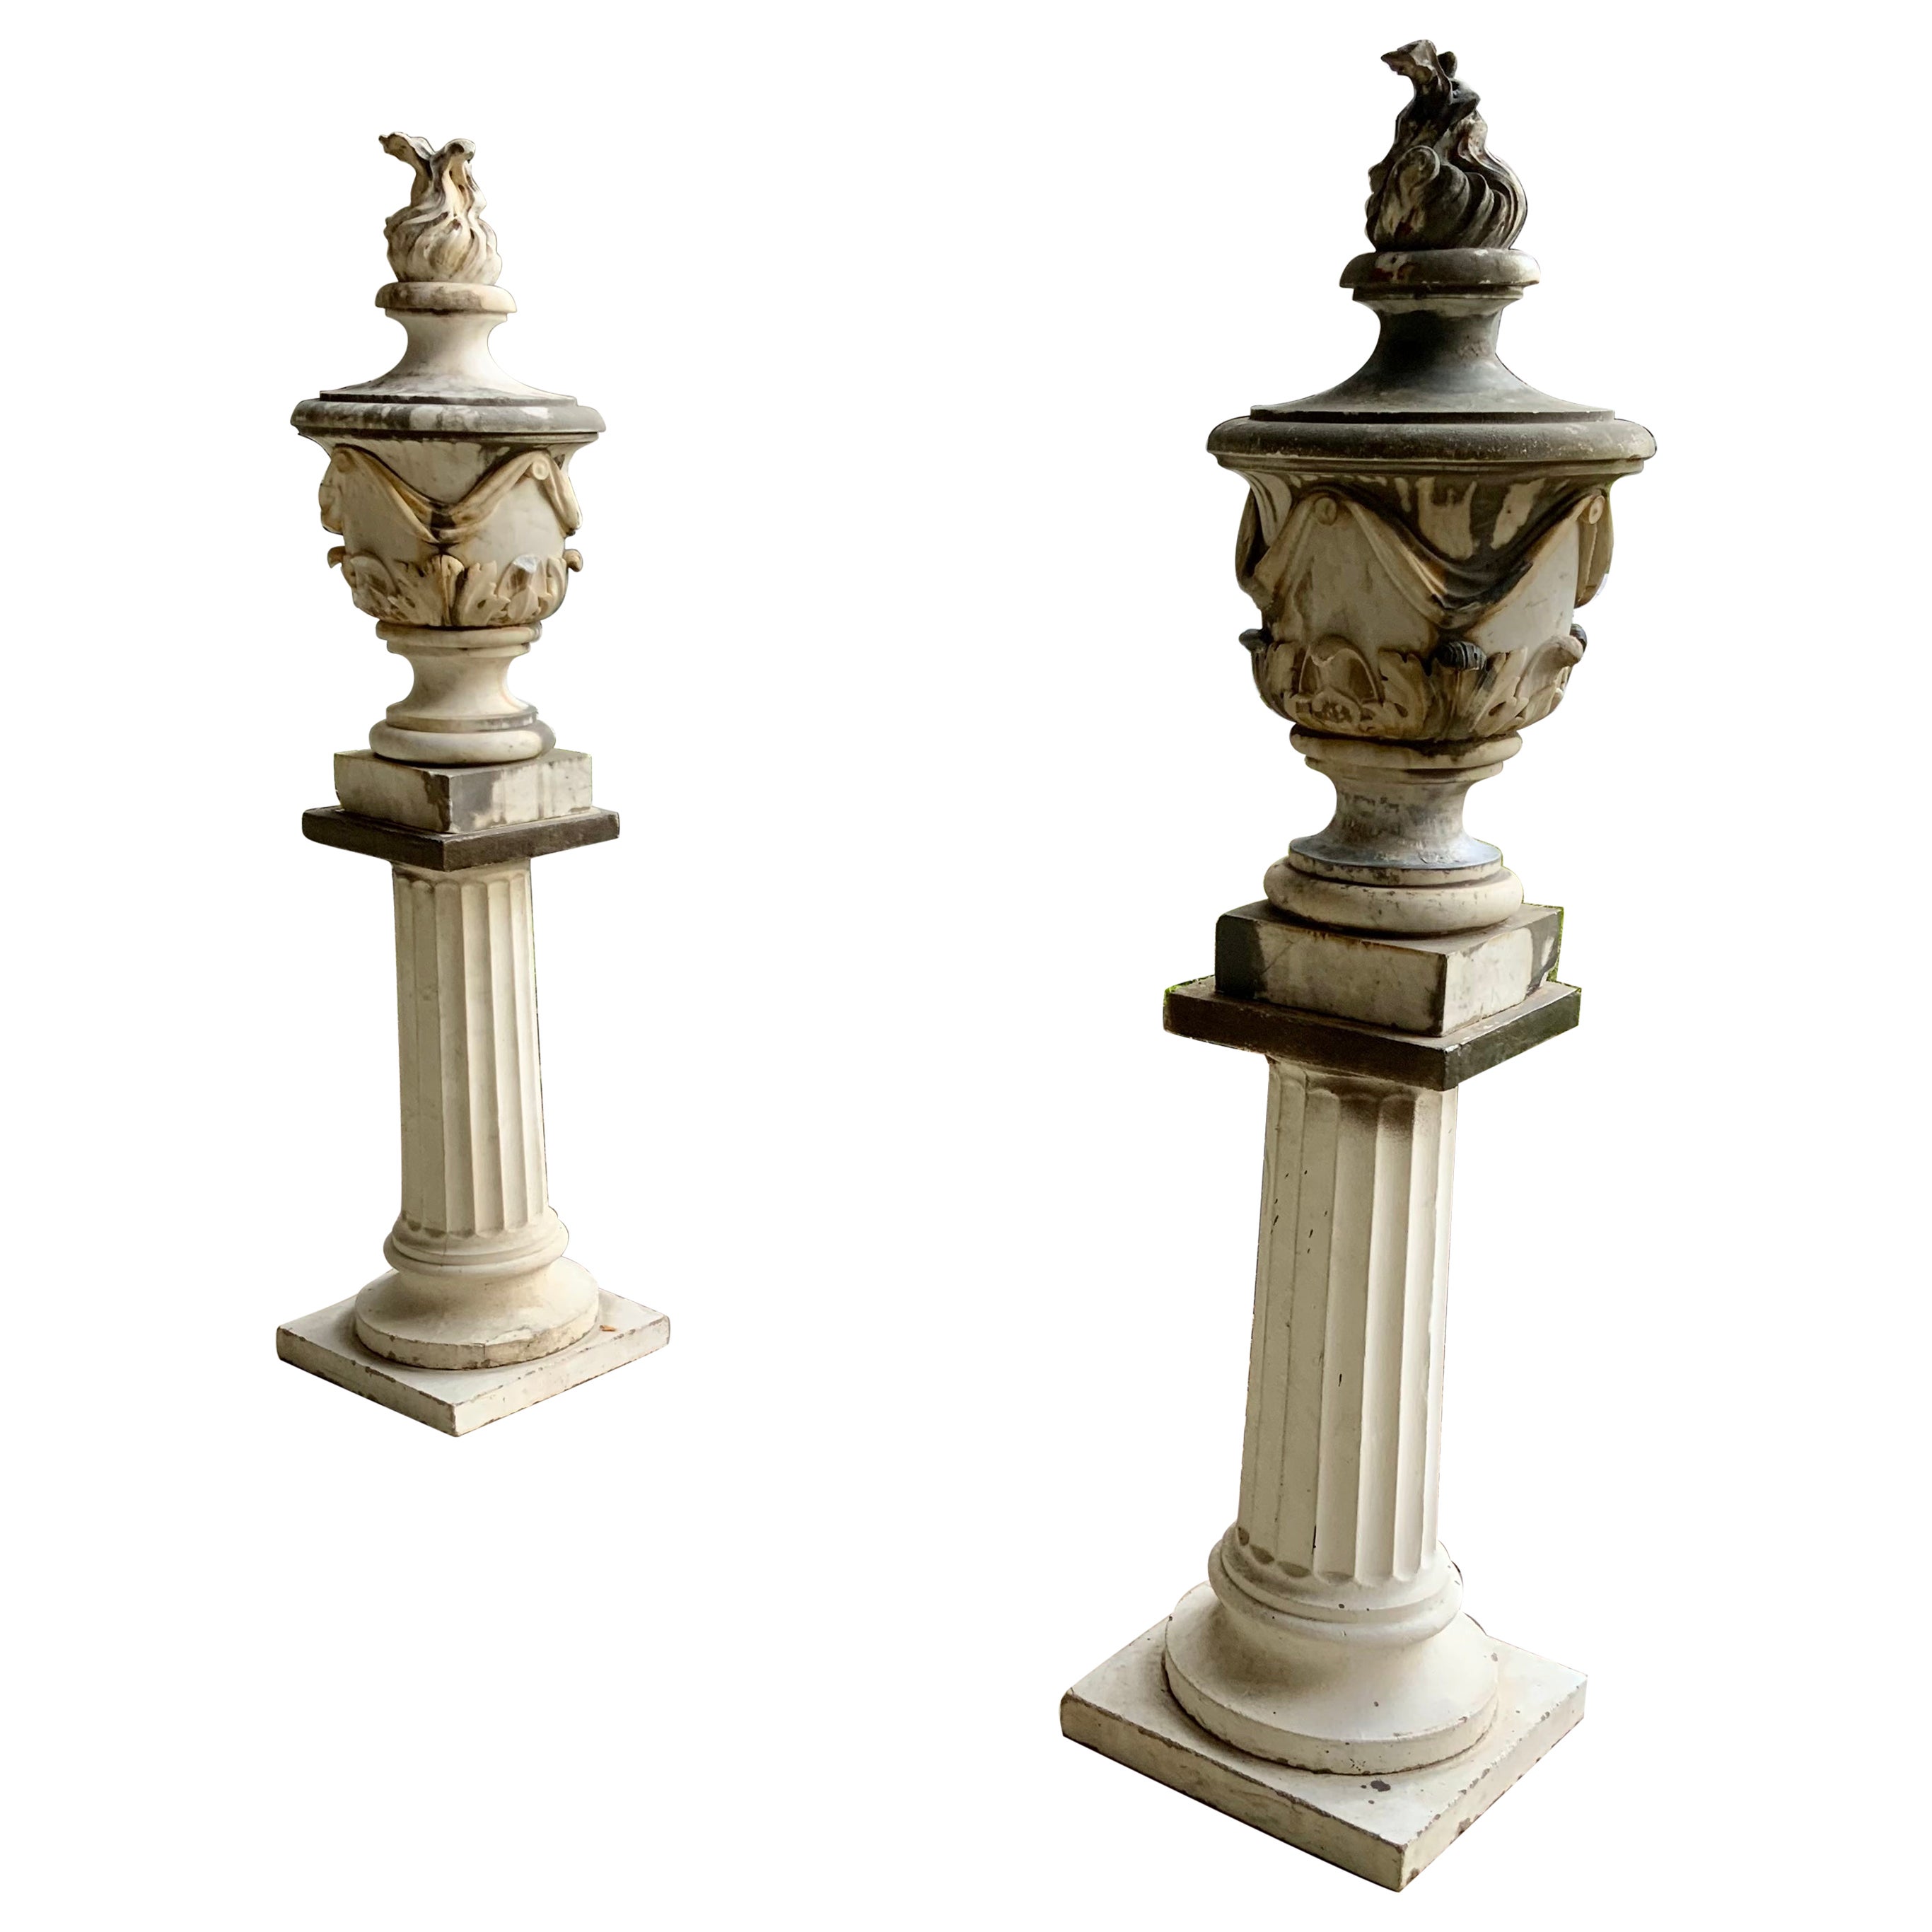 Pair of Antique Marble Carved Urns on Pedestals